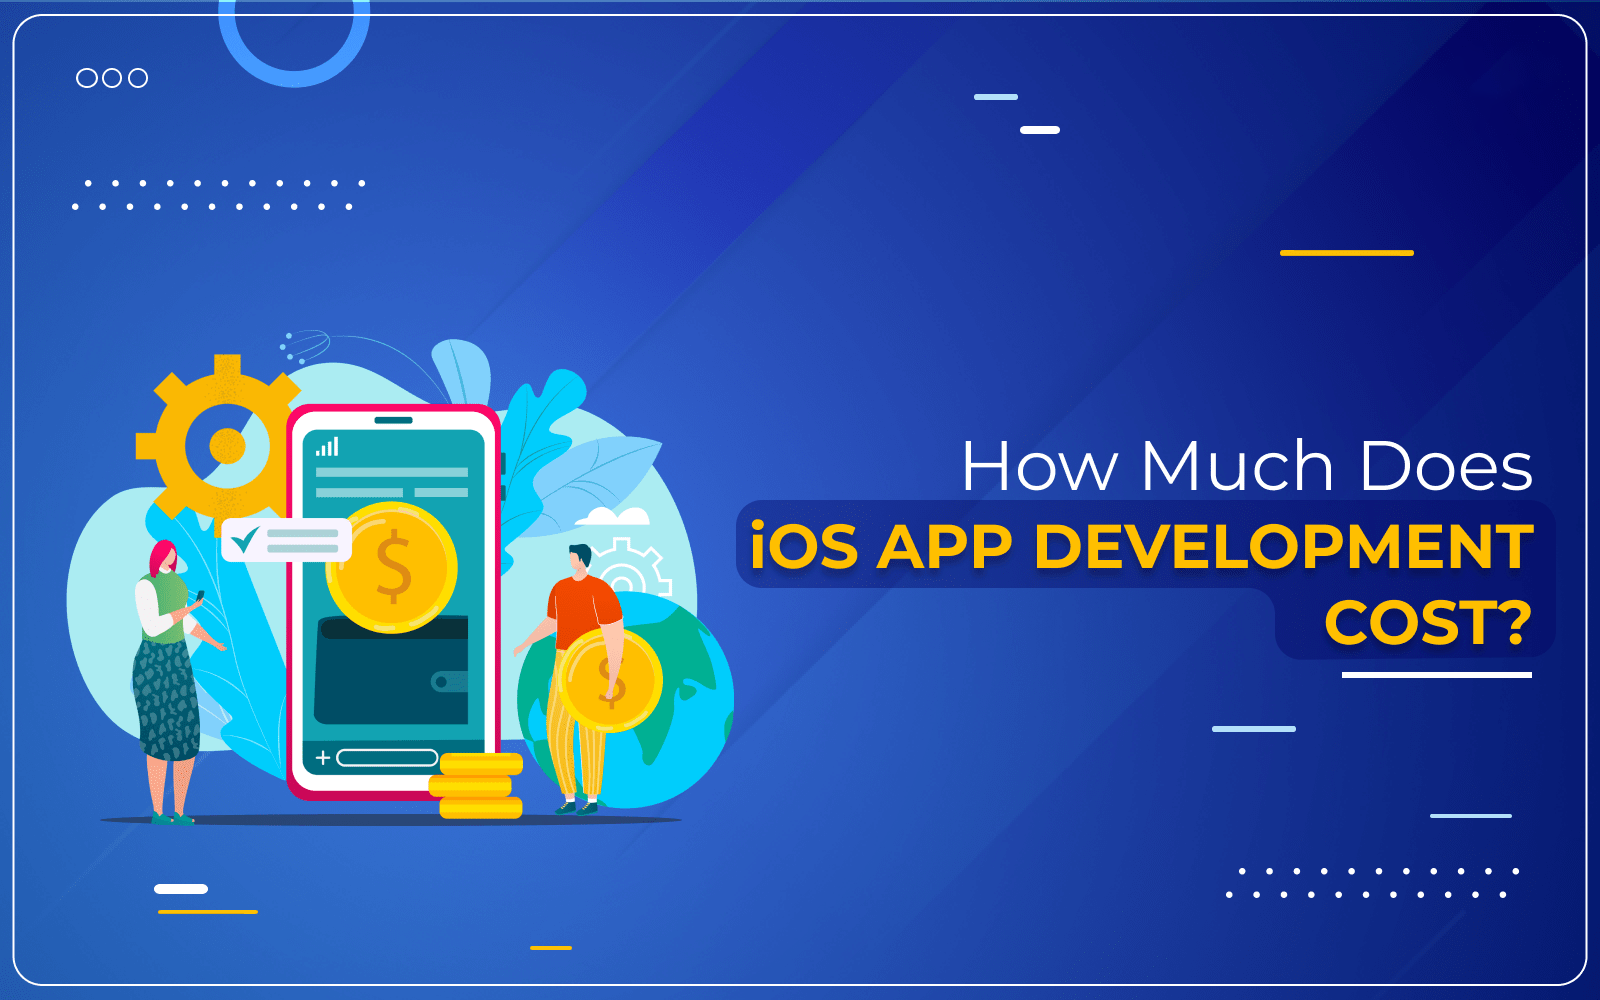 How Much Does iOS App Development Cost